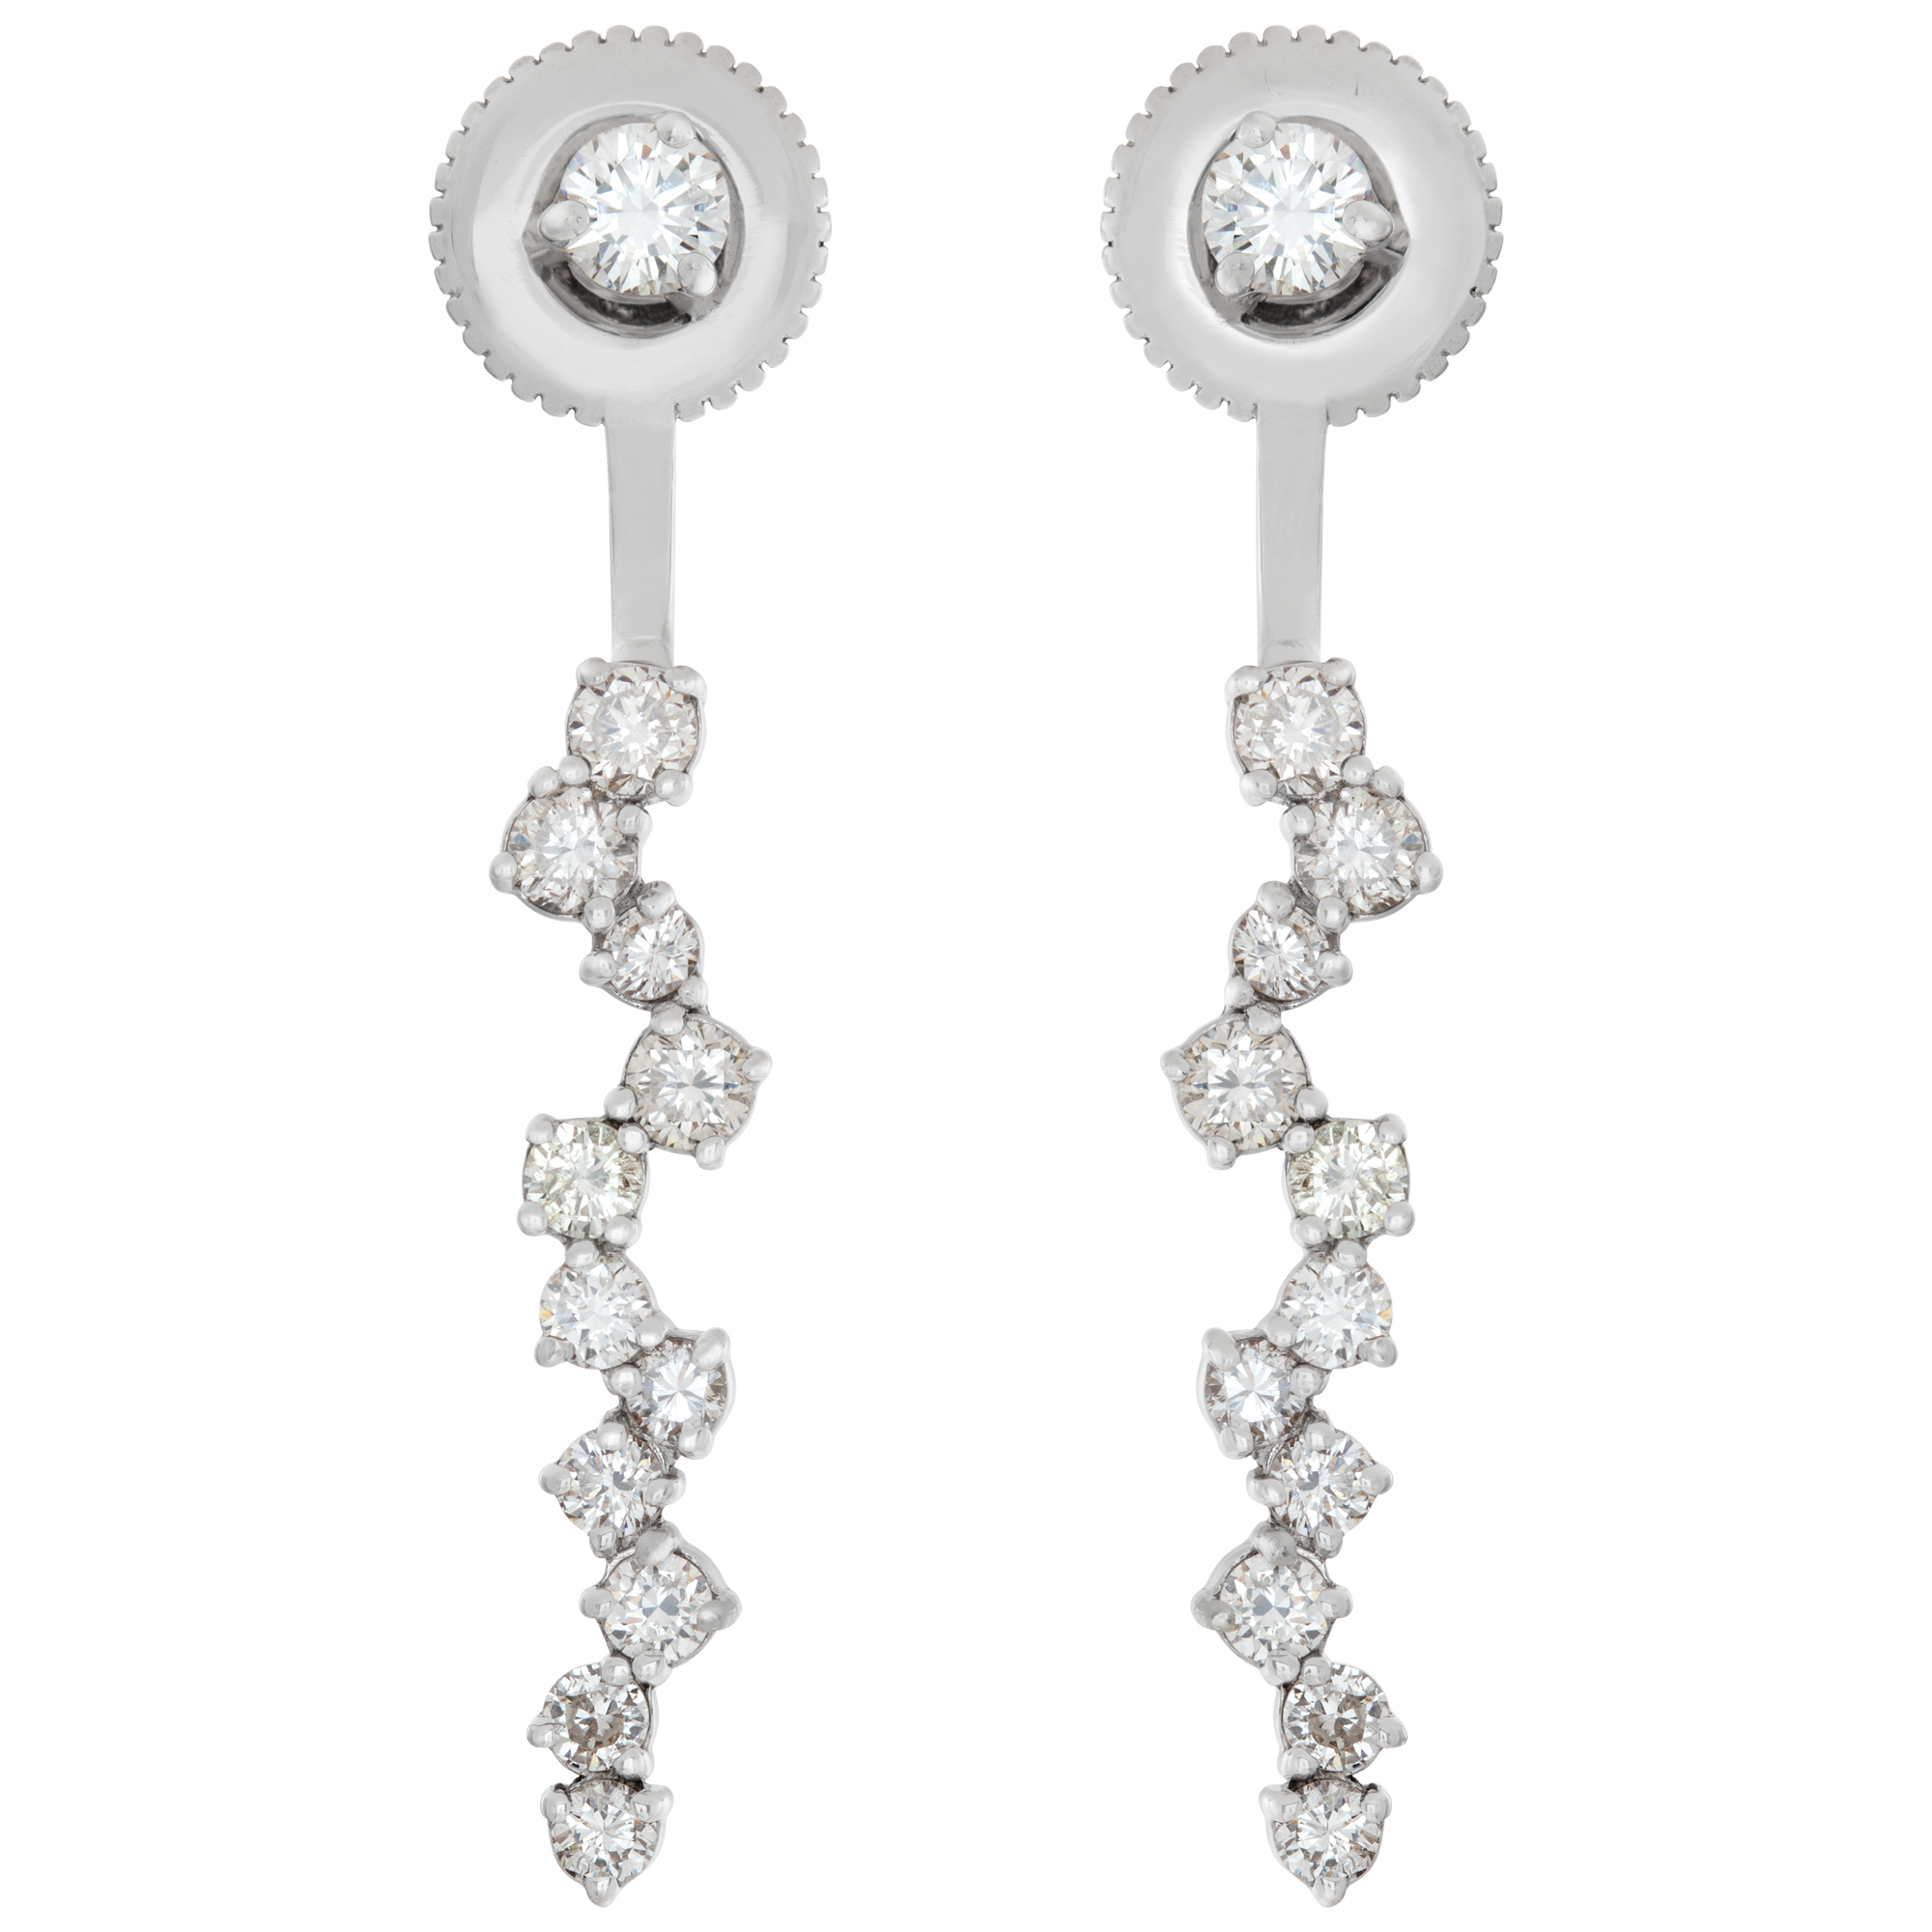 Diamond IcIcle earrings in 18k white gold. 1.28 carats in diamonds